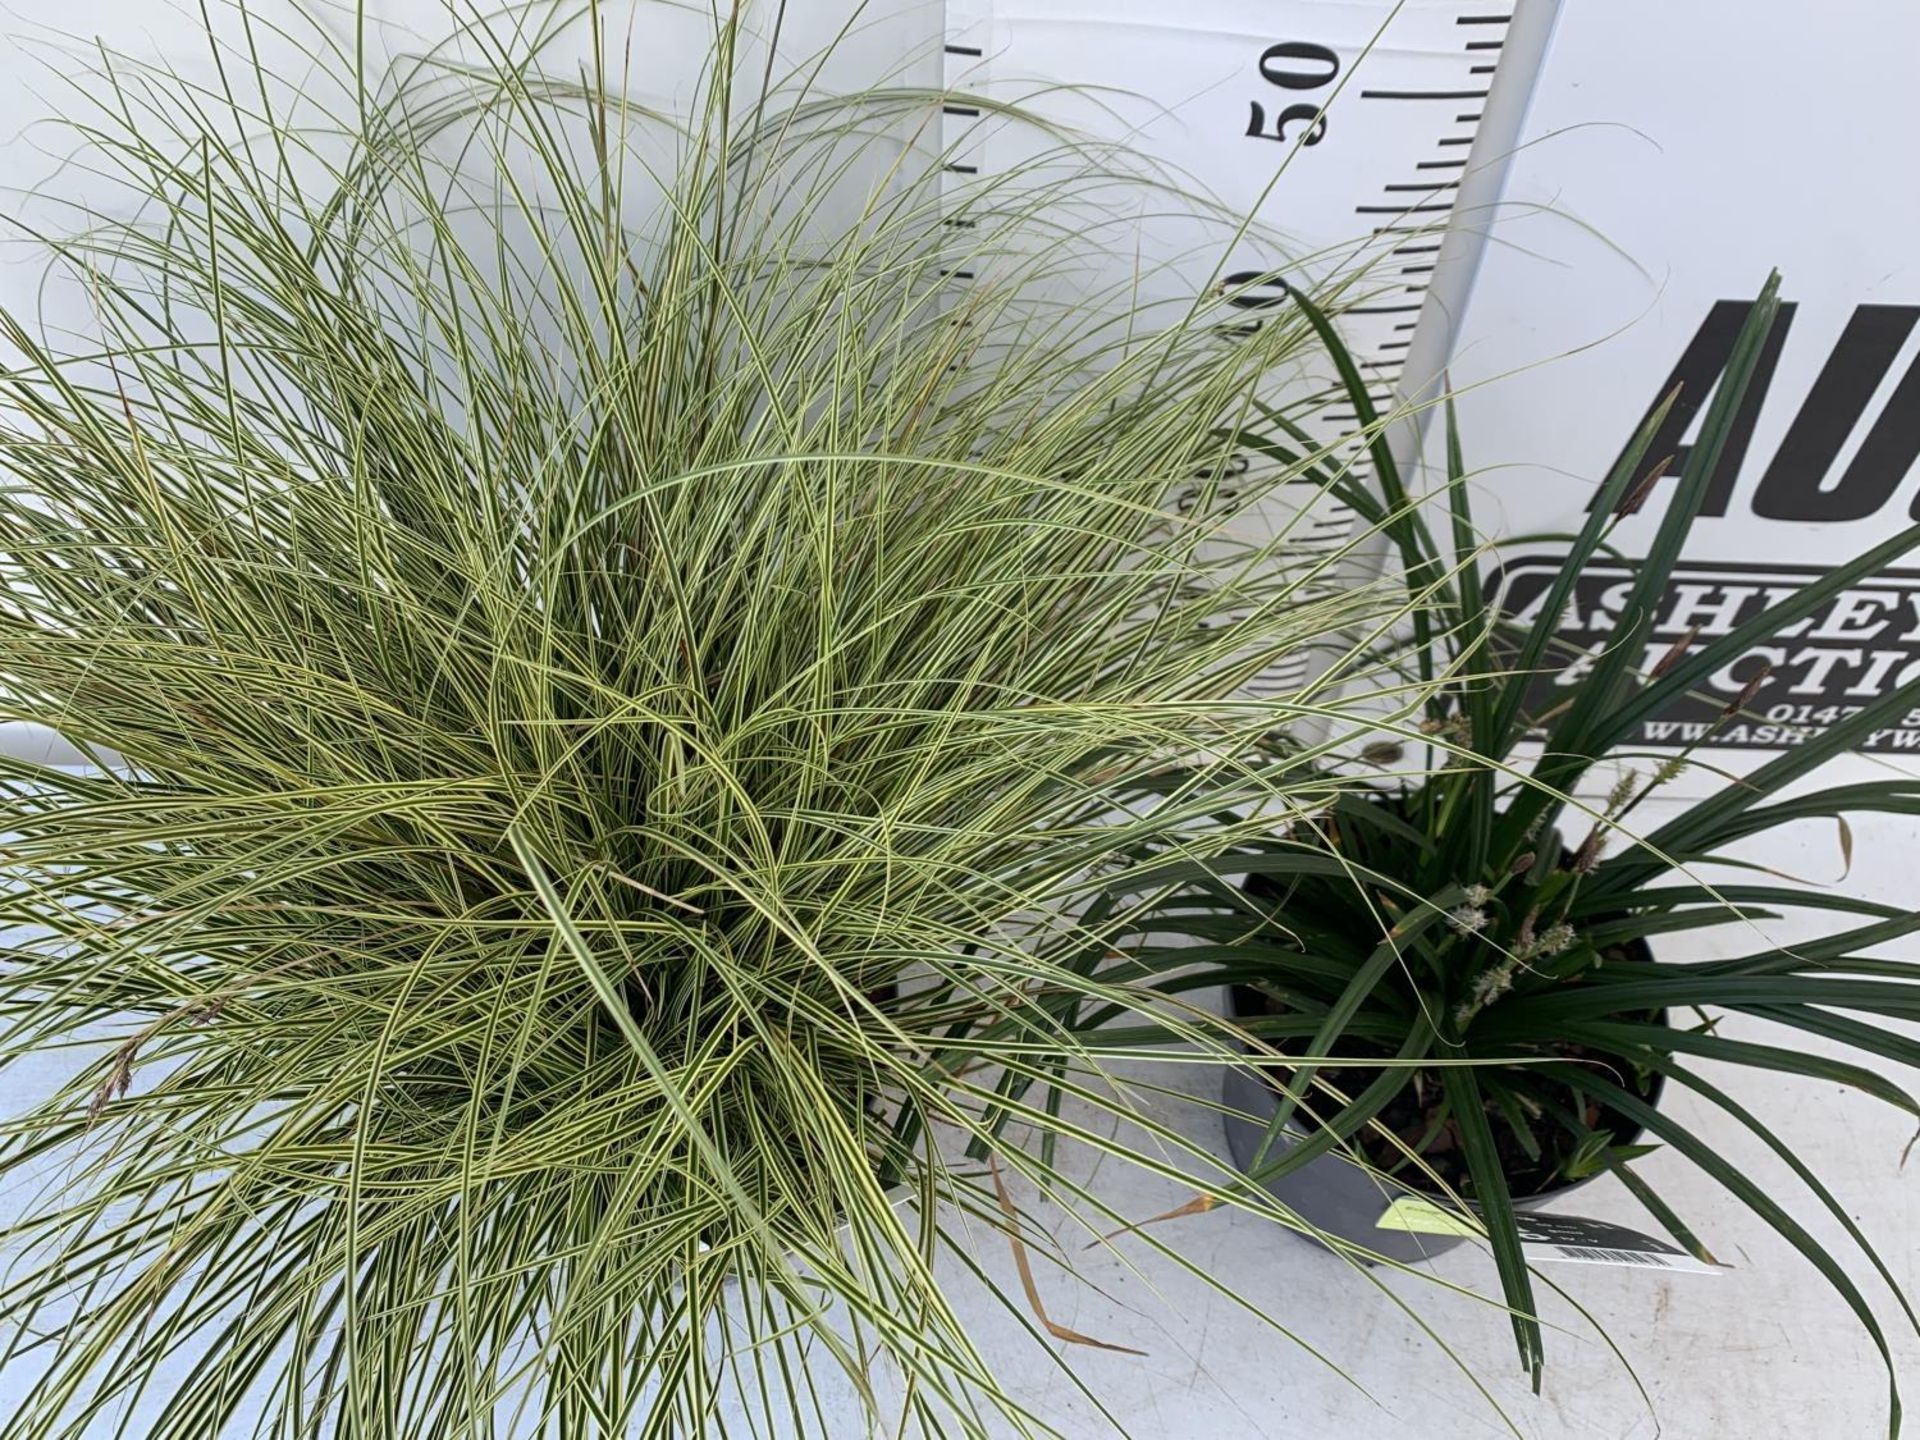 TWO HARDY AND EVERGREEN GRASSES CAREX BRUNNEA AND MORROWII IN 3 LTR POTS 50CM TALL PLUS VAT TO BE - Image 4 of 12